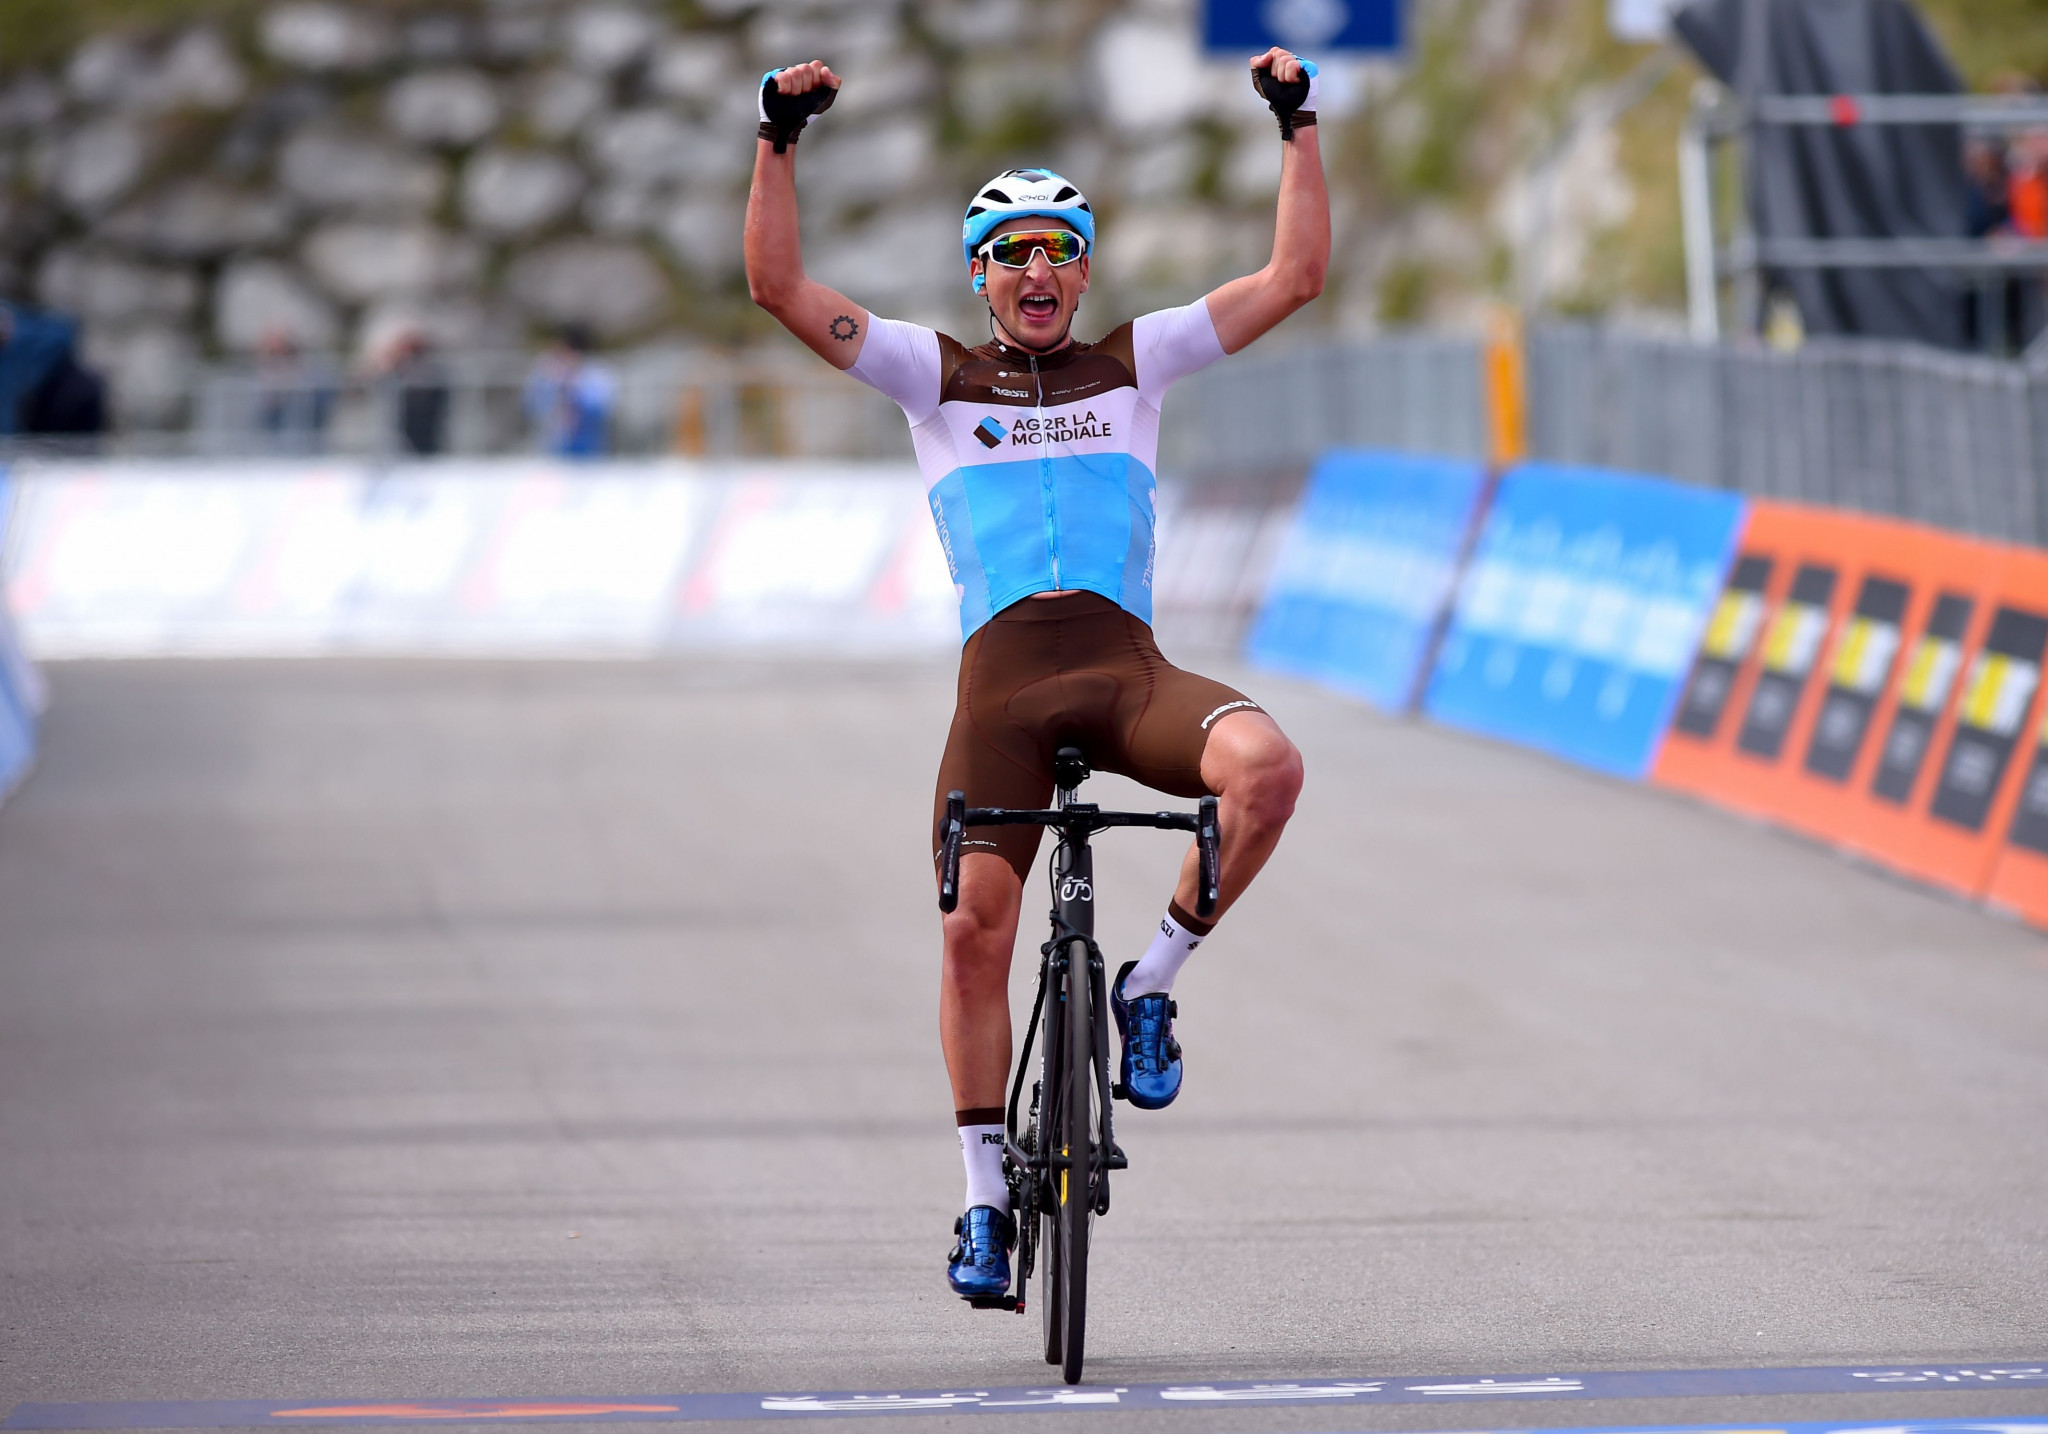 Peters triumphs on stage 17 of Giro d'Italia as Carapaz maintains grip on overall lead